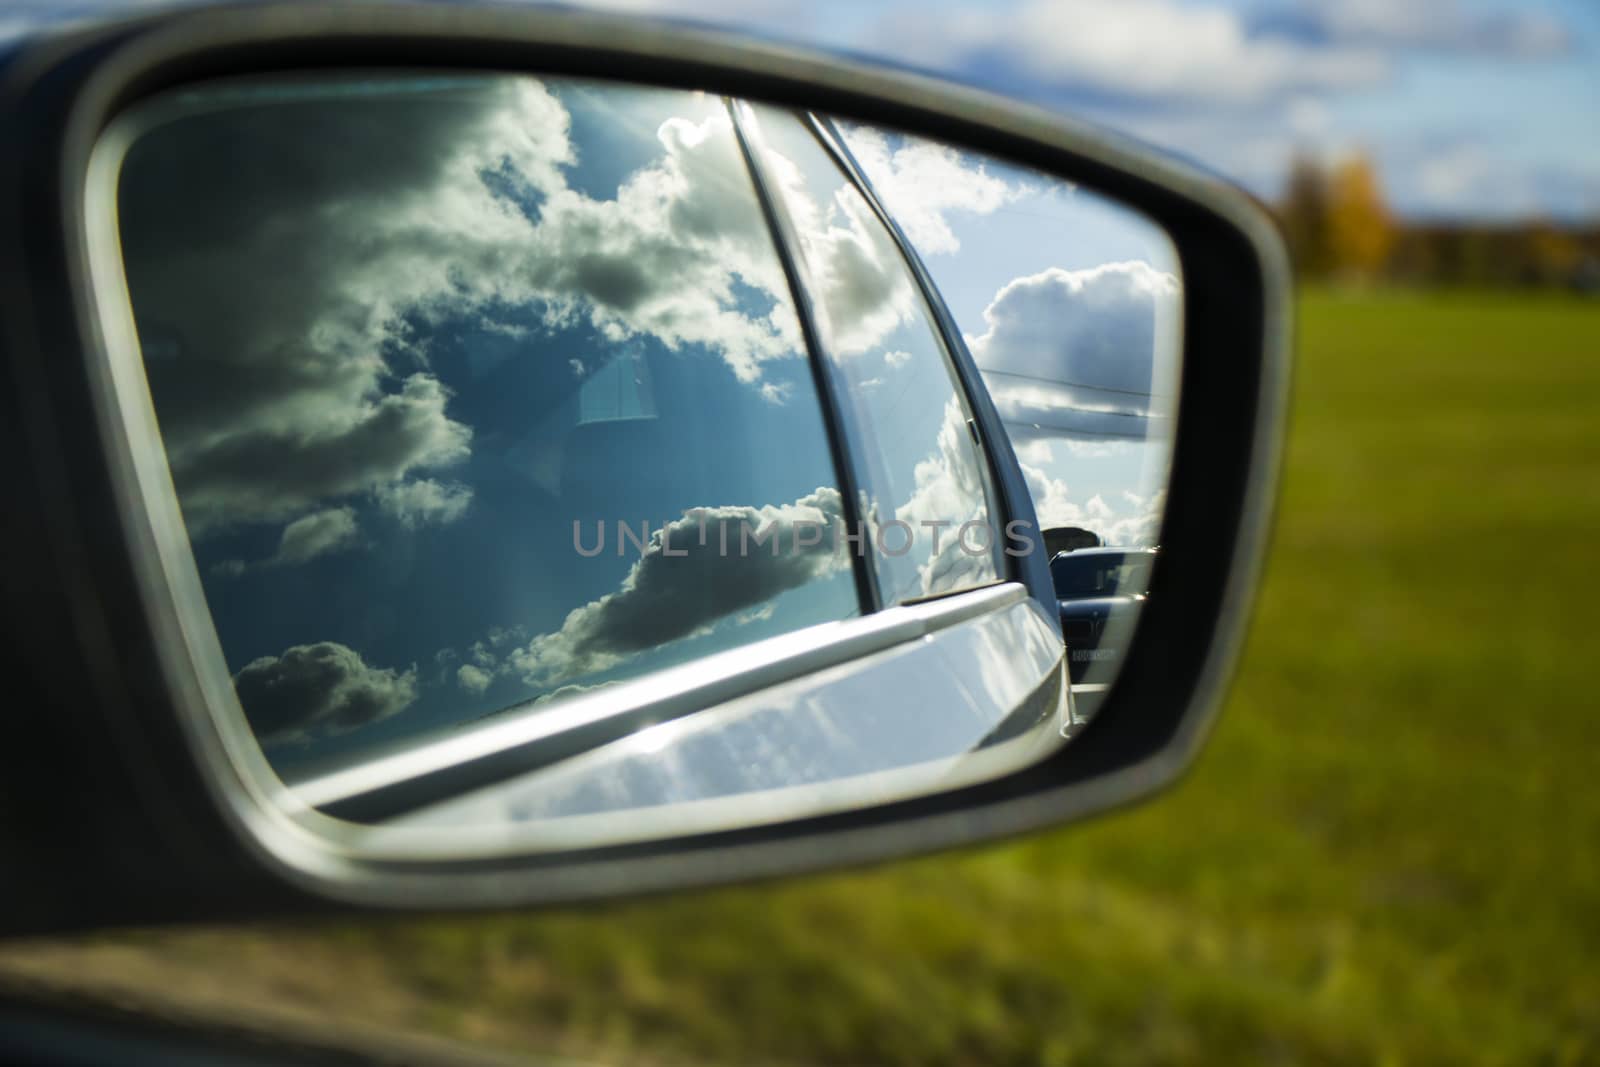 View in the car mirror.Highway, autobahn and road landscape. Automobile, cars and vehicles. Blue sky and sunny day. European autobahn. Nature and urban together.